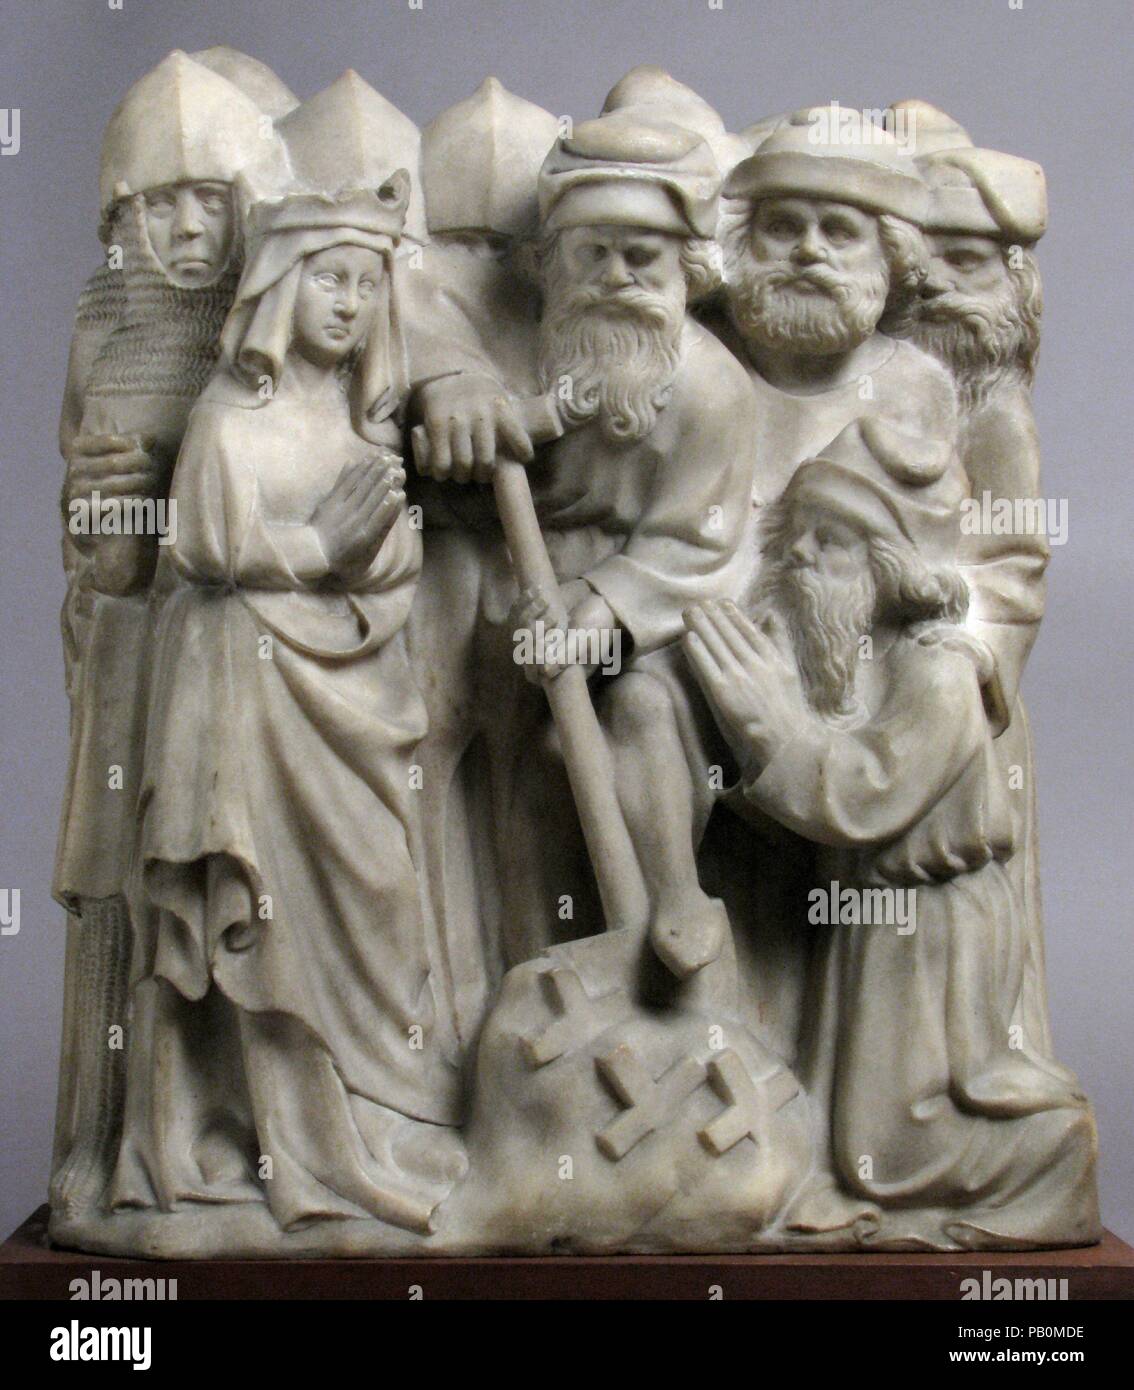 Relief with Scene from the Legend of the True Cross. Culture: South Netherlandish. Dimensions: 15 13/16 × 13 11/16 × 4 15/16 in. (40.1 × 34.7 × 12.5 cm). Date: ca. 1400.  This relief, along with another in the collection (acc. no. 23.79.1), once formed part of a narrative that stretched across the back of an altar. Carved from single blocks of marble, the two compositions feature episodes from the discovery of the True Cross by Saint Helena, the mother of the Roman Emperor Constantine. In order to bring these distant events into the present, the sculptor employed clothing and character types f Stock Photo